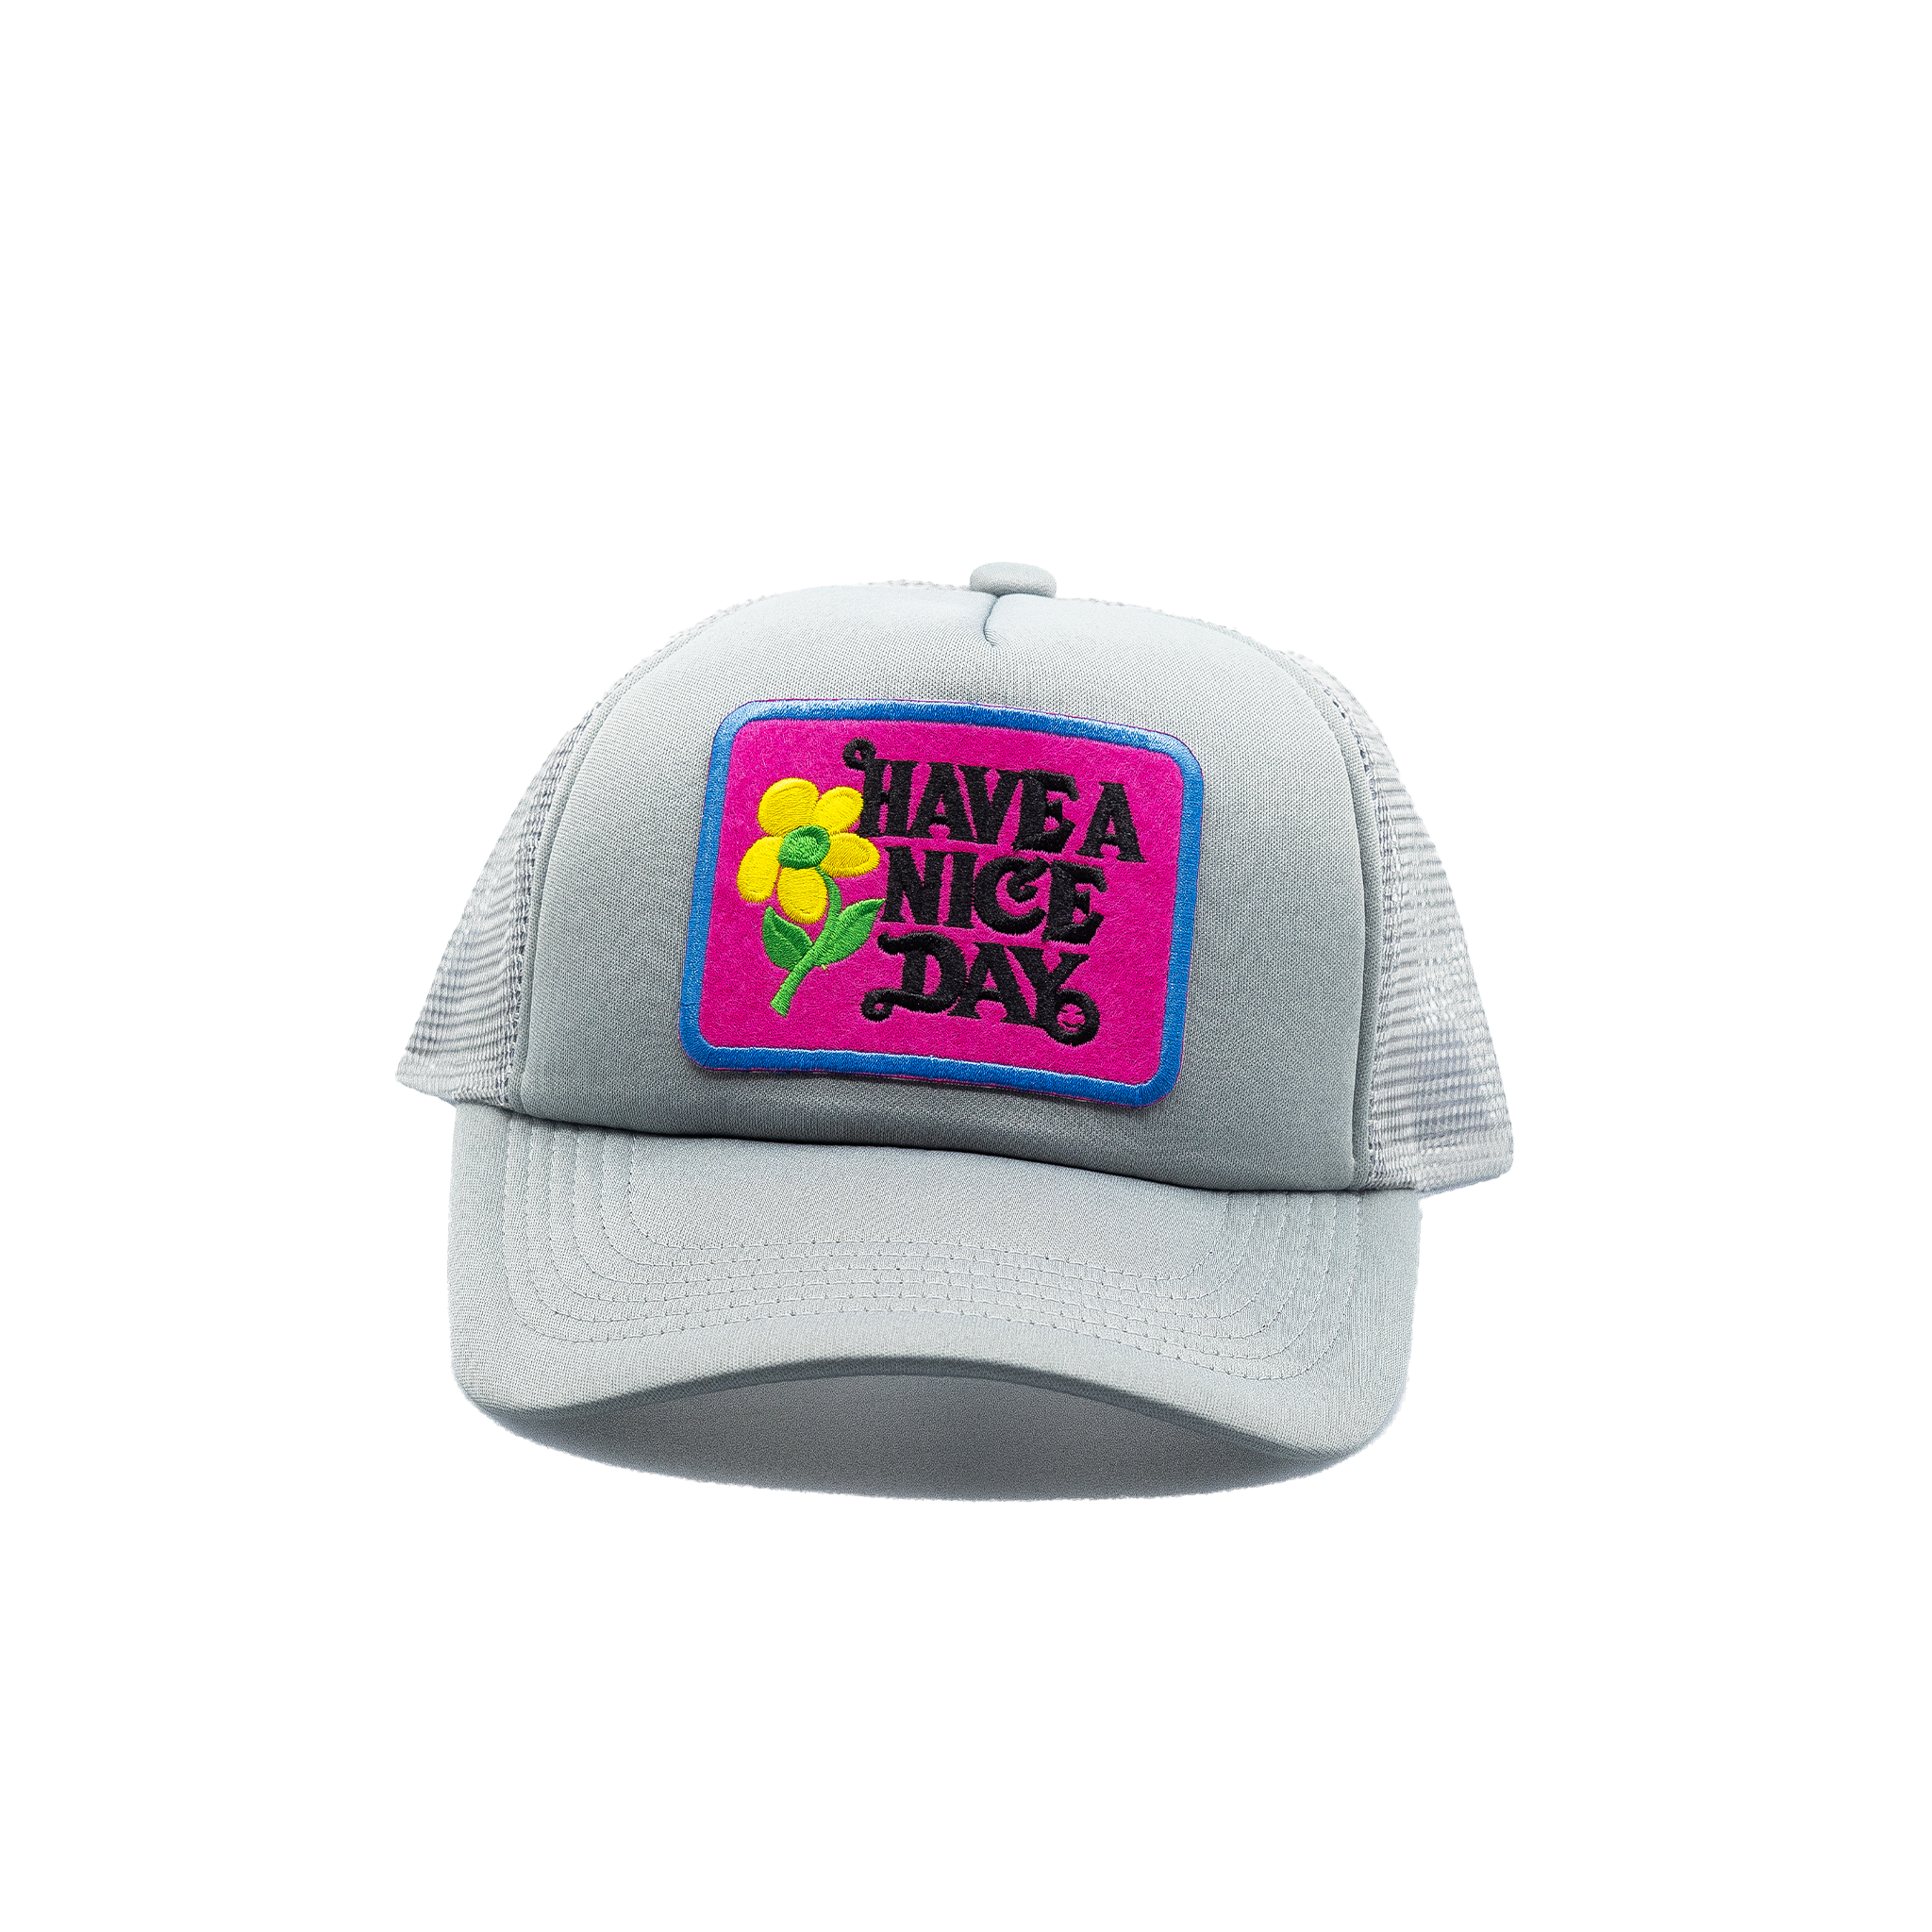 Have a Nice Day Gray All Styles Trucker Hat